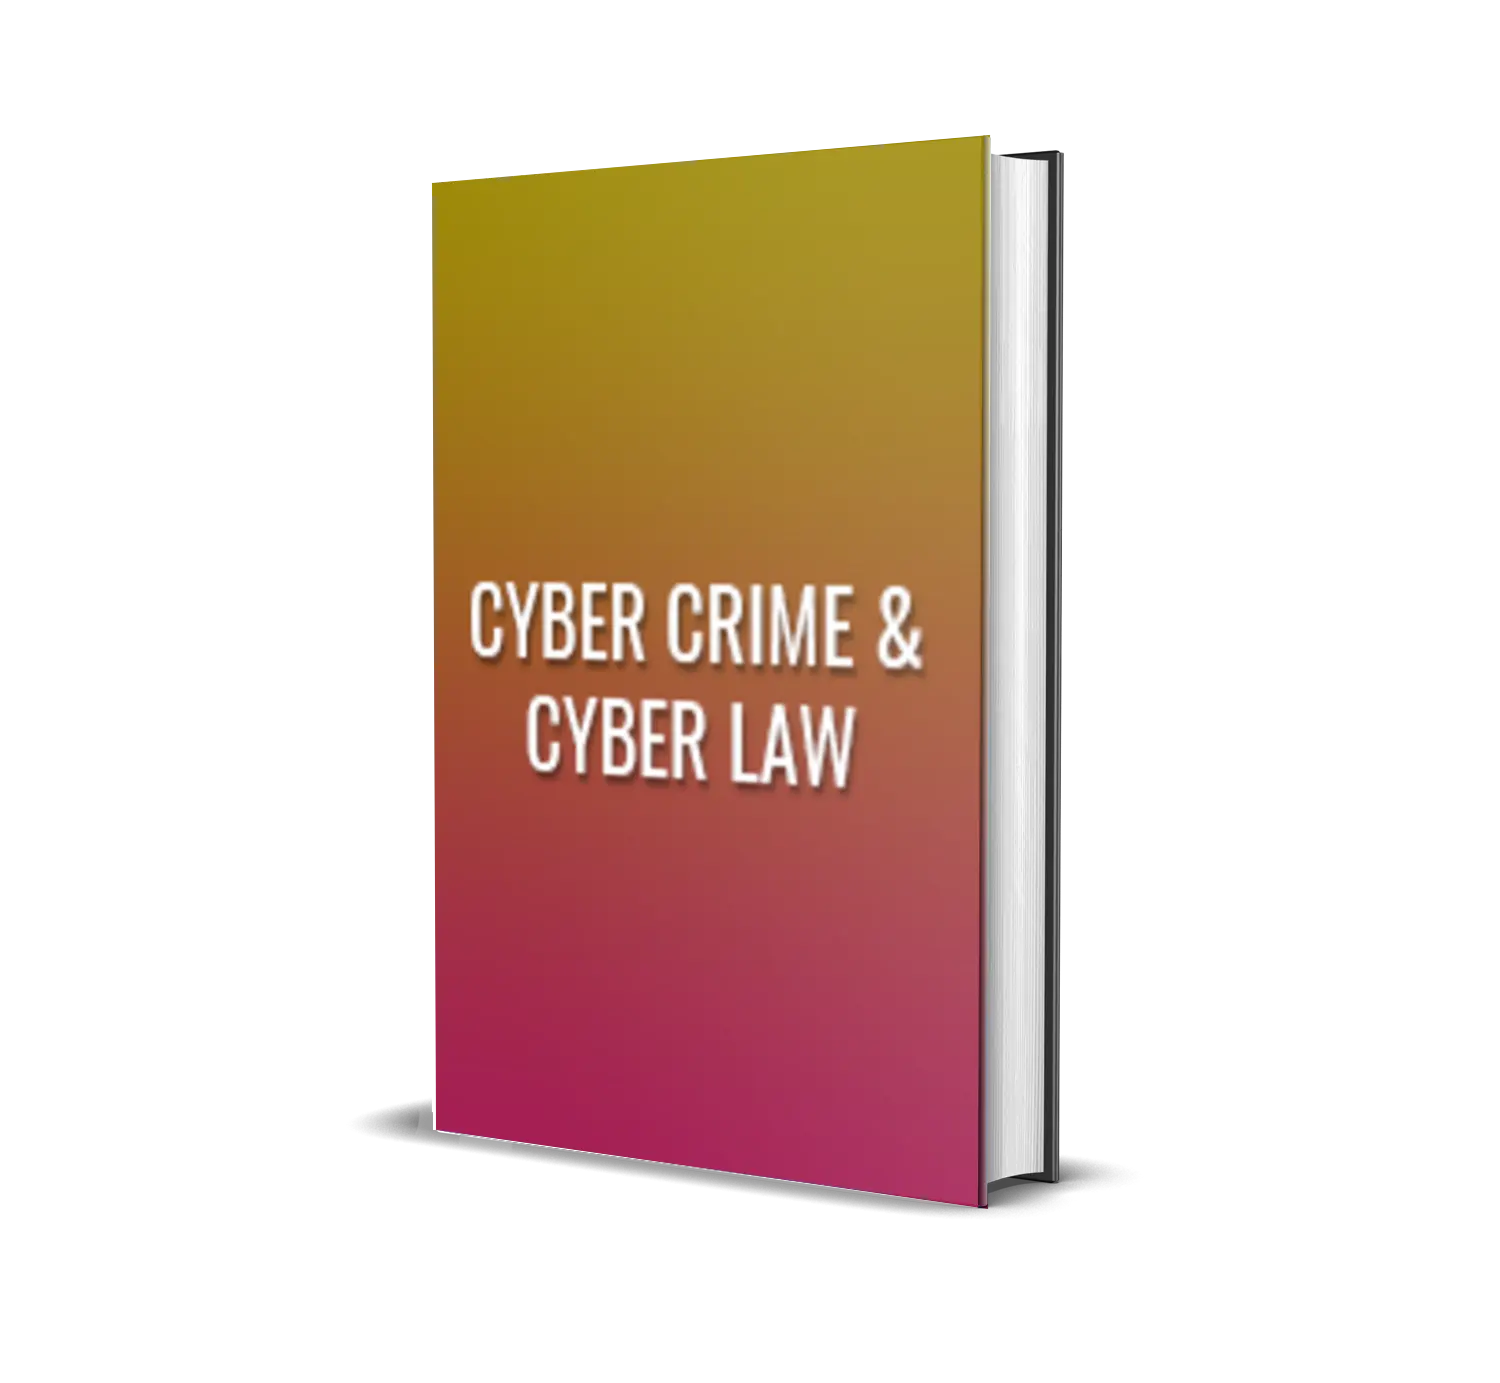 Cyber Crime & Cyber Law